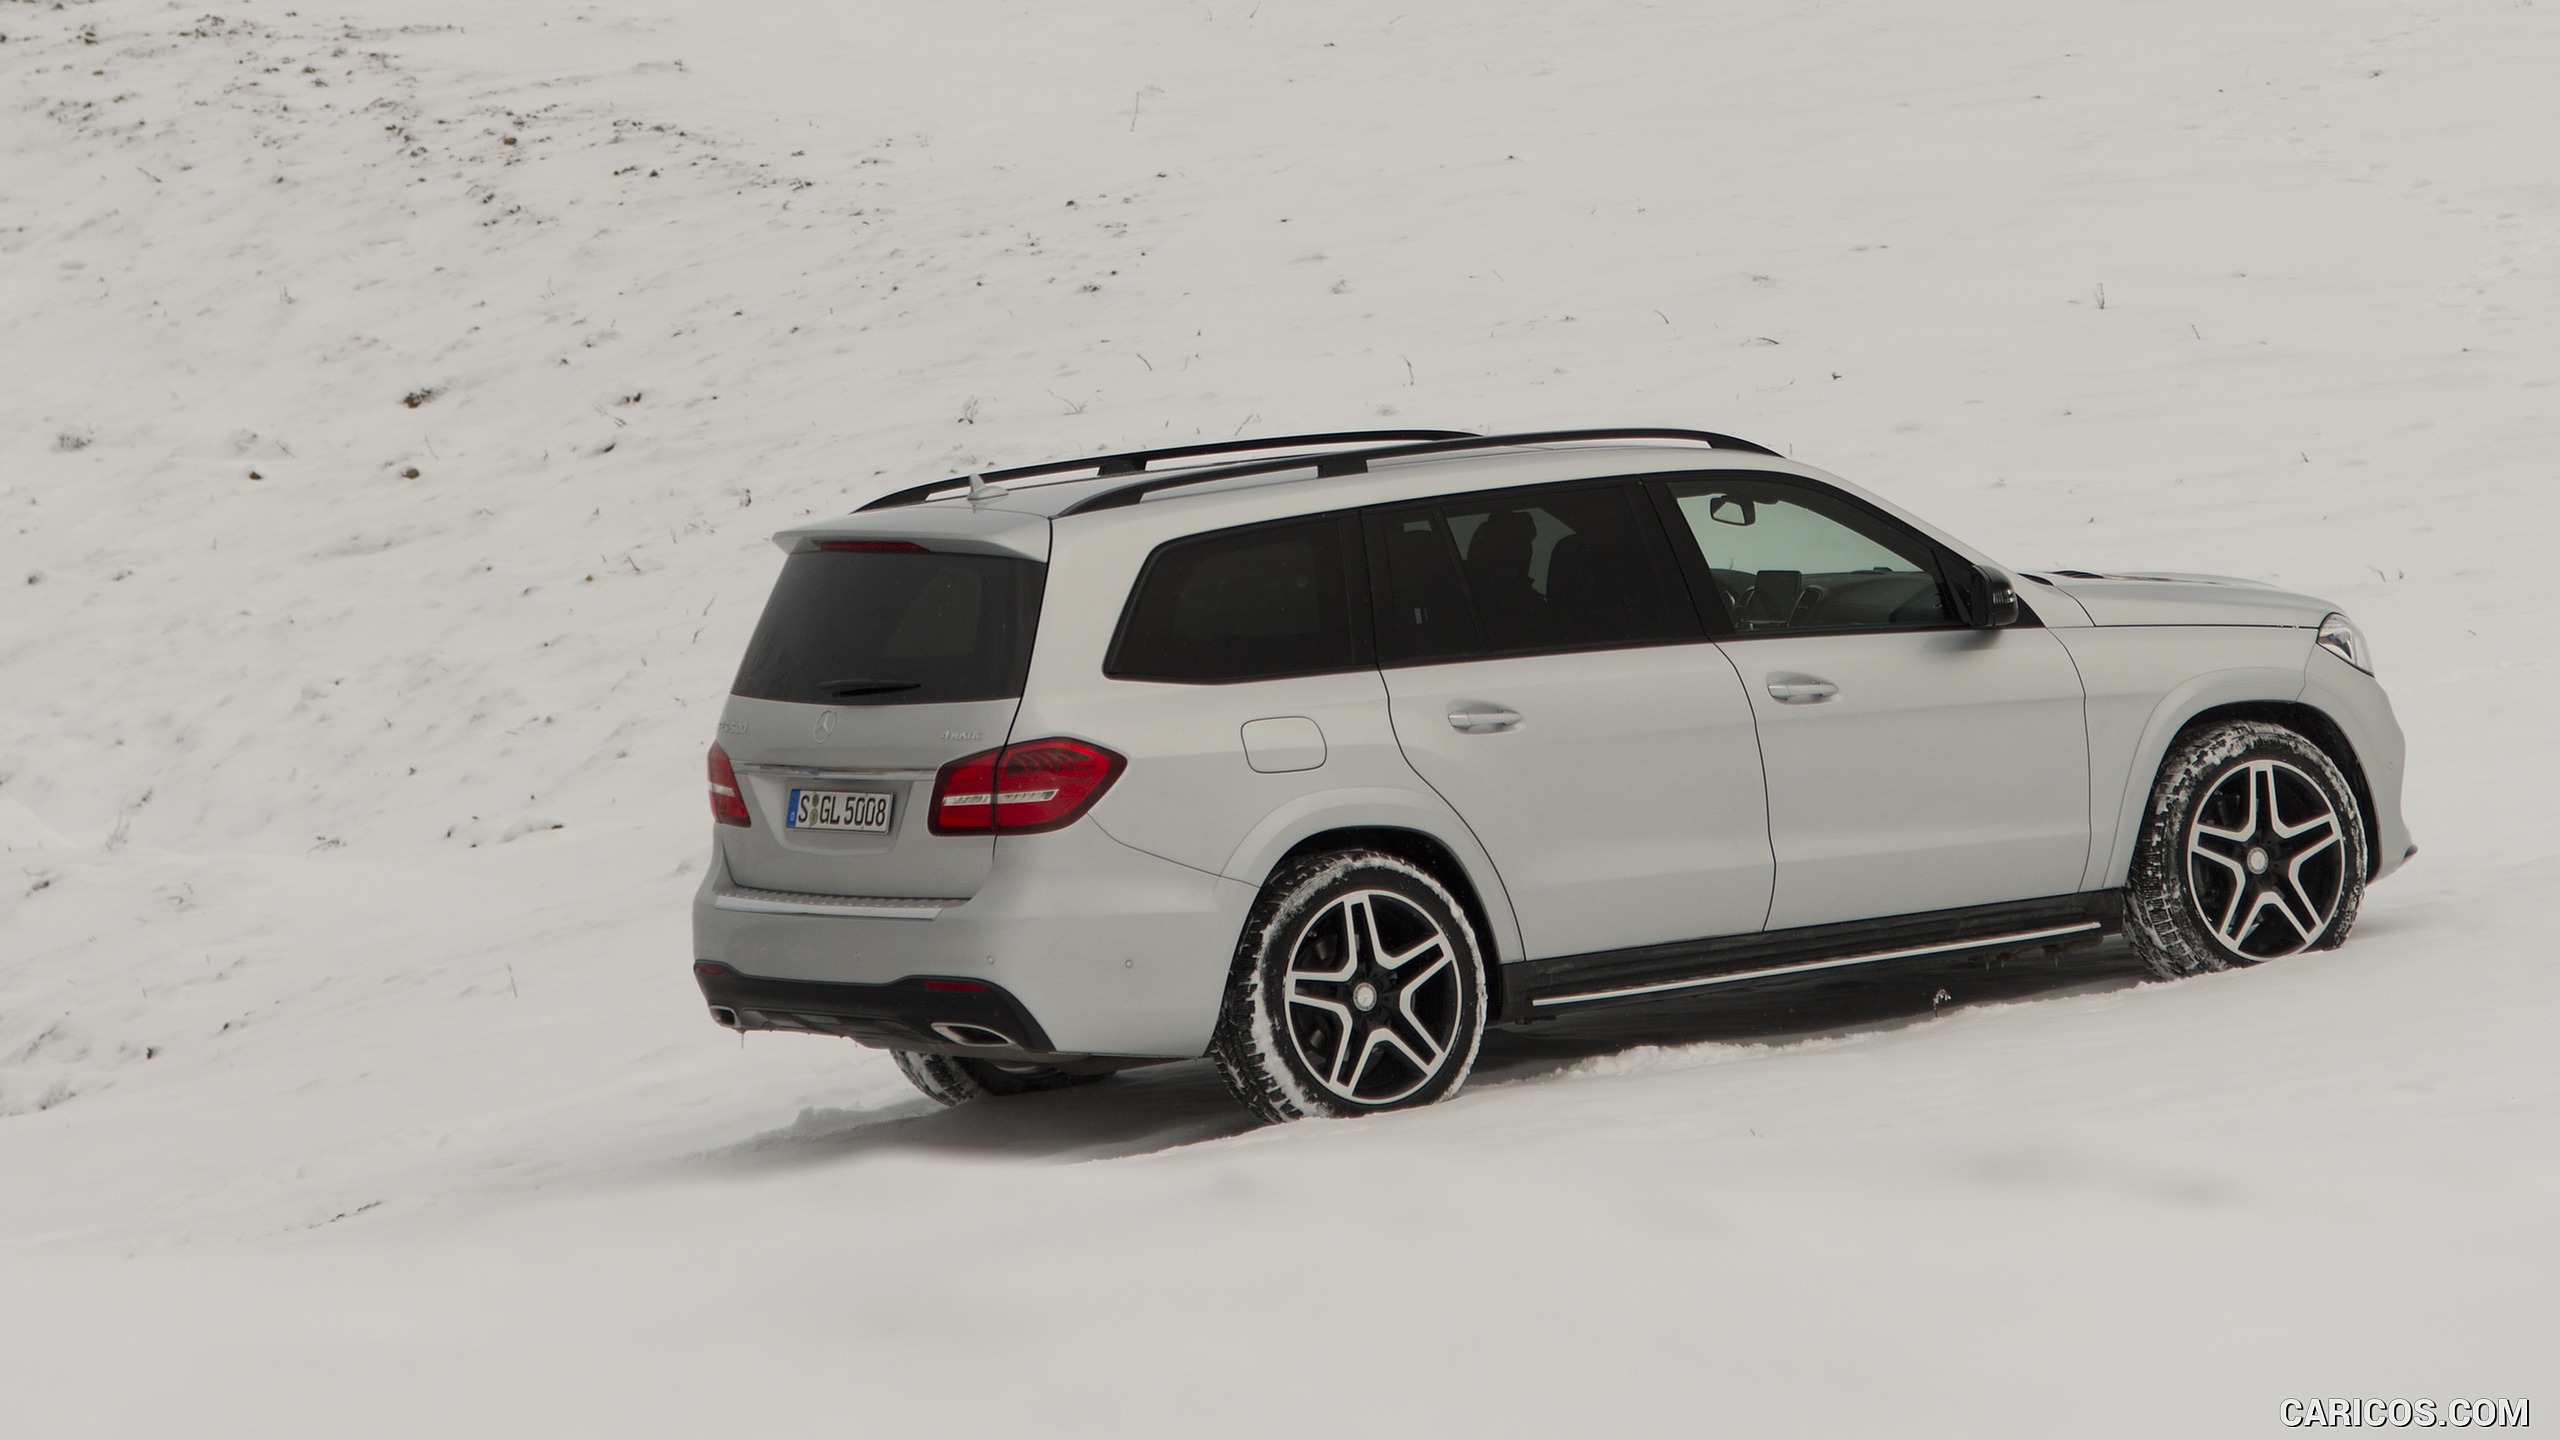 2017 Mercedes-Benz GLS 500 4MATIC AMG Line in Snow - Side, #158 of 255